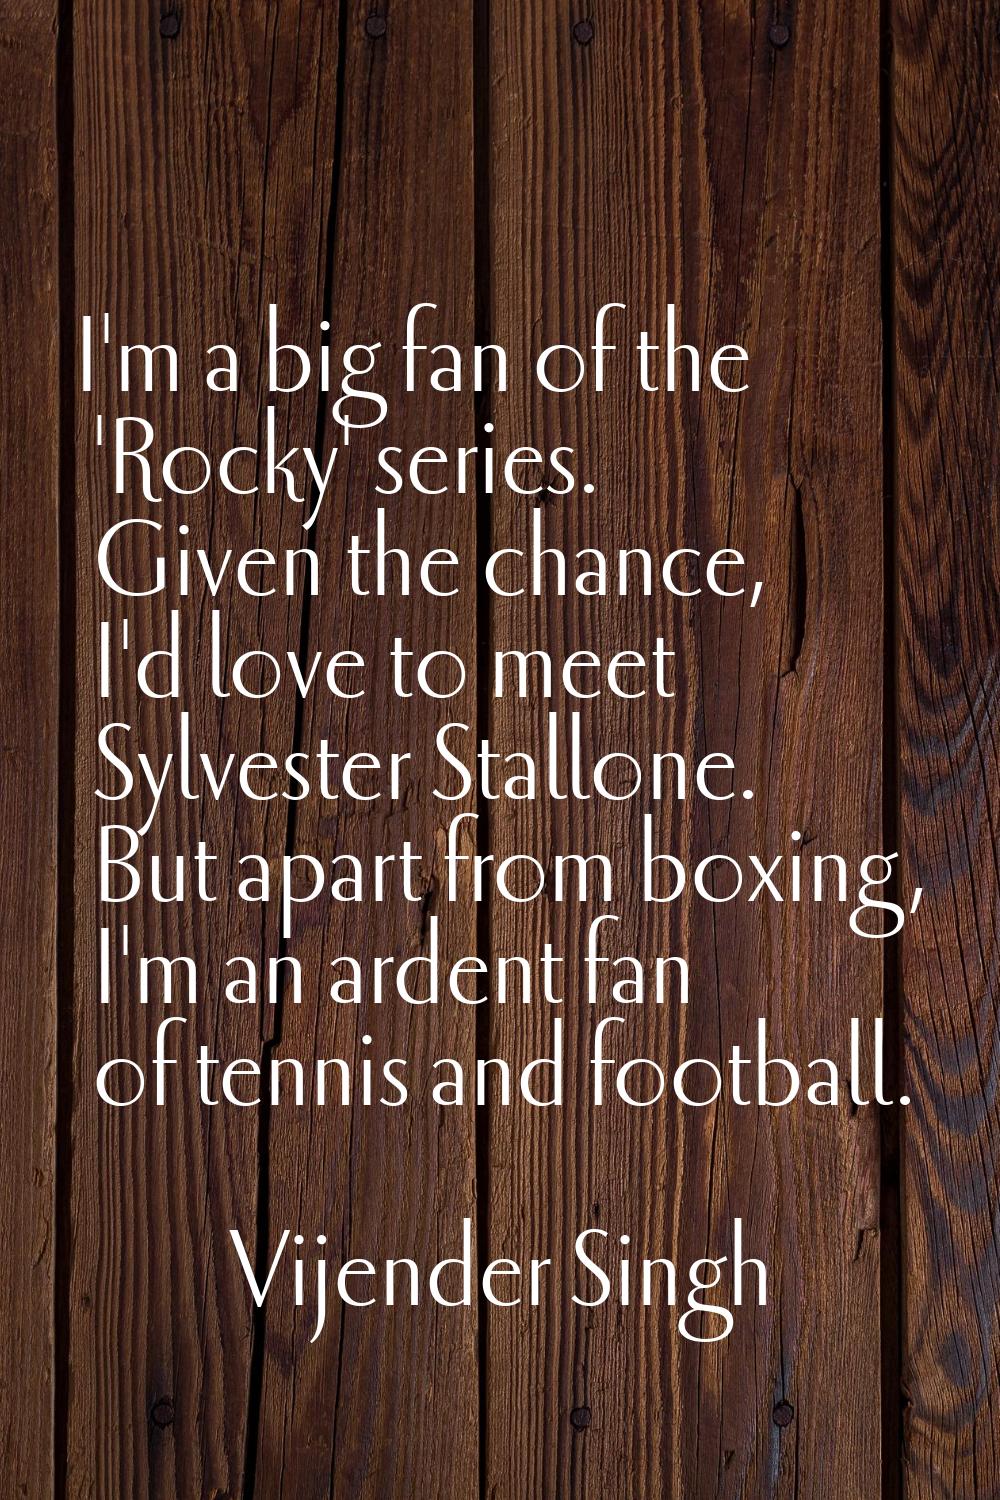 I'm a big fan of the 'Rocky' series. Given the chance, I'd love to meet Sylvester Stallone. But apa